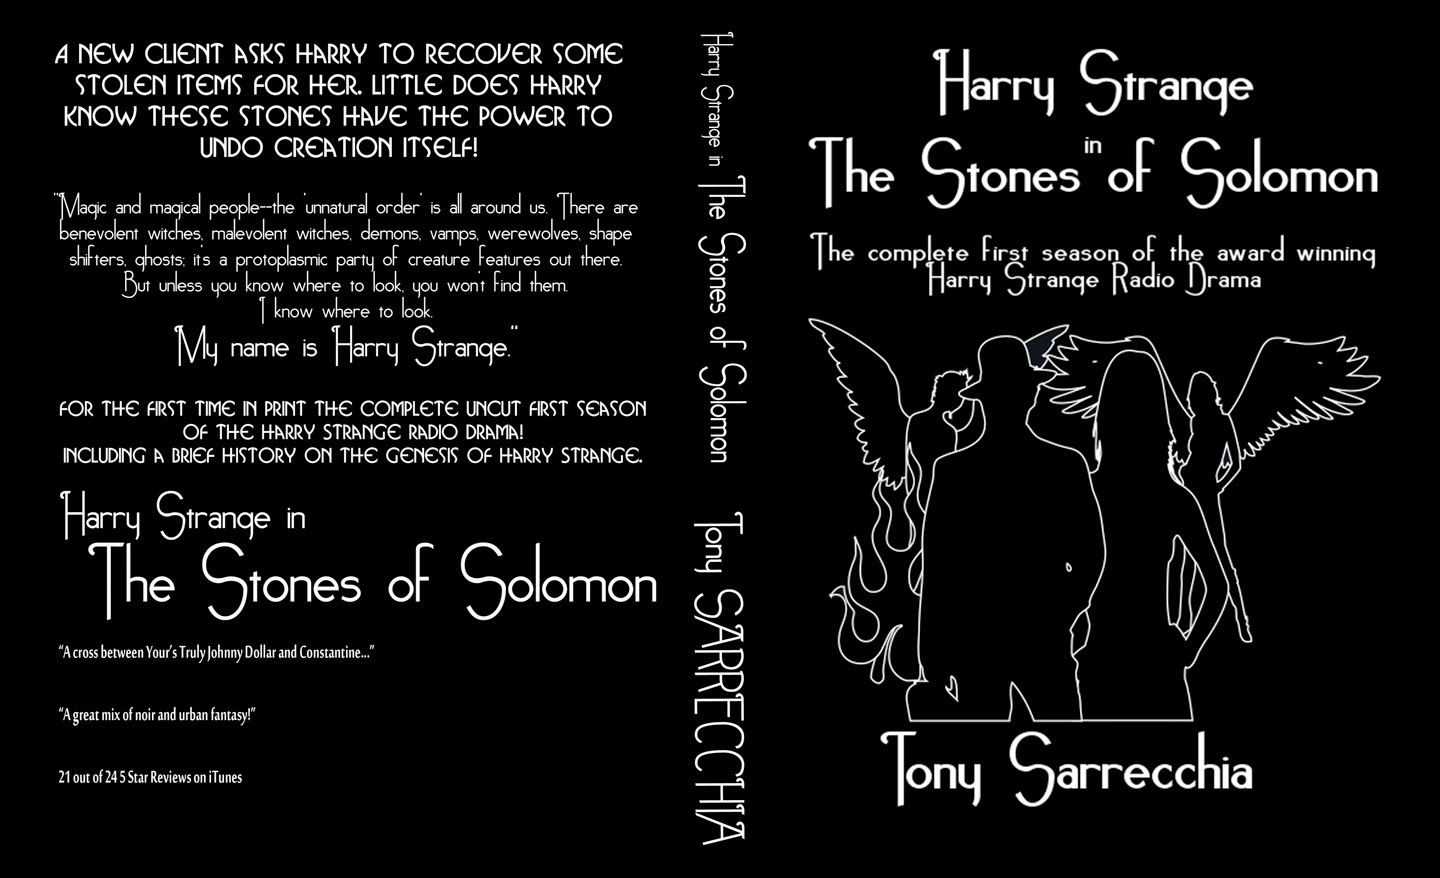 Cover for the novel (bound scripts) of Harry Strange in The Stones of Solomon